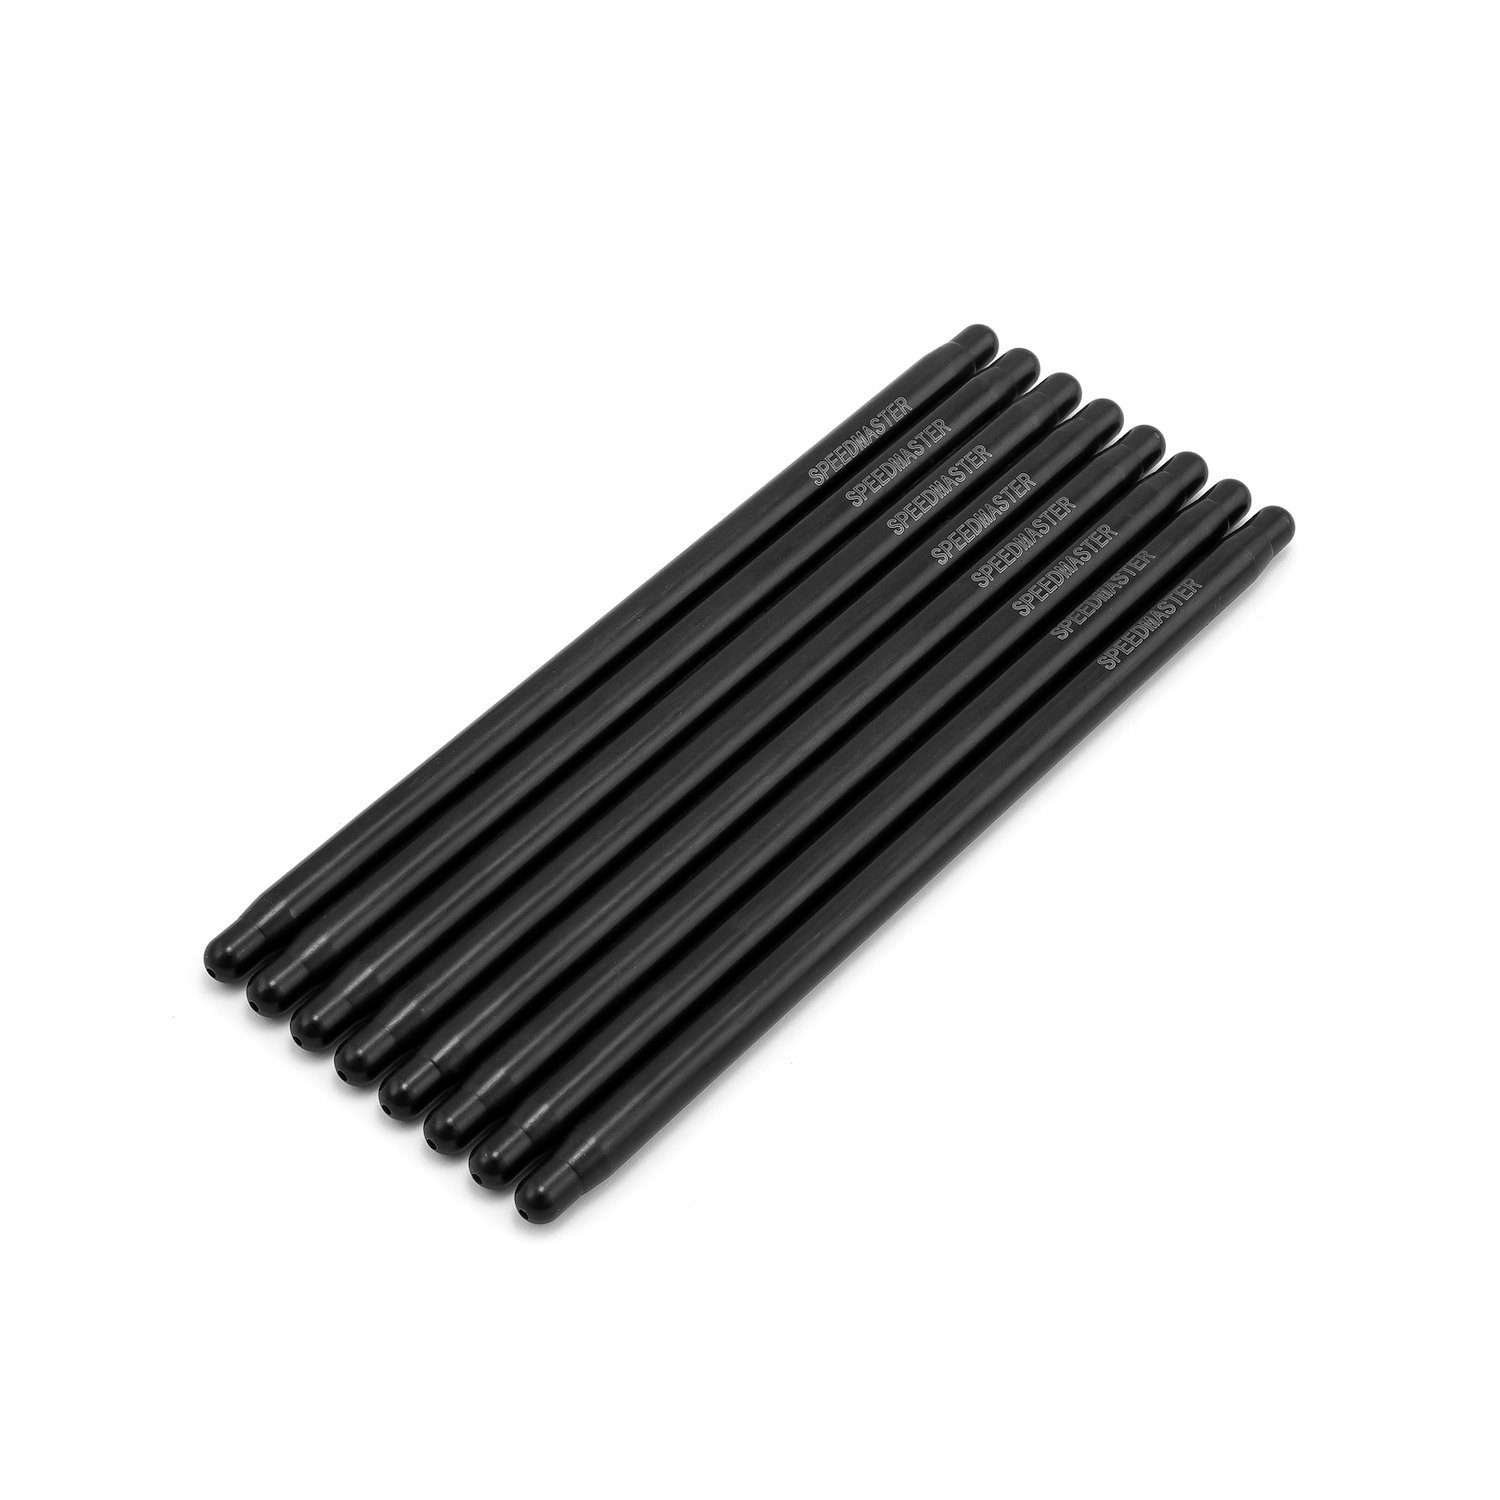 1-254-036 8.800 in. Chromoly Heat-Treated 3/8 in. 0.080 in. Wall DNA One-Piece Pushrods